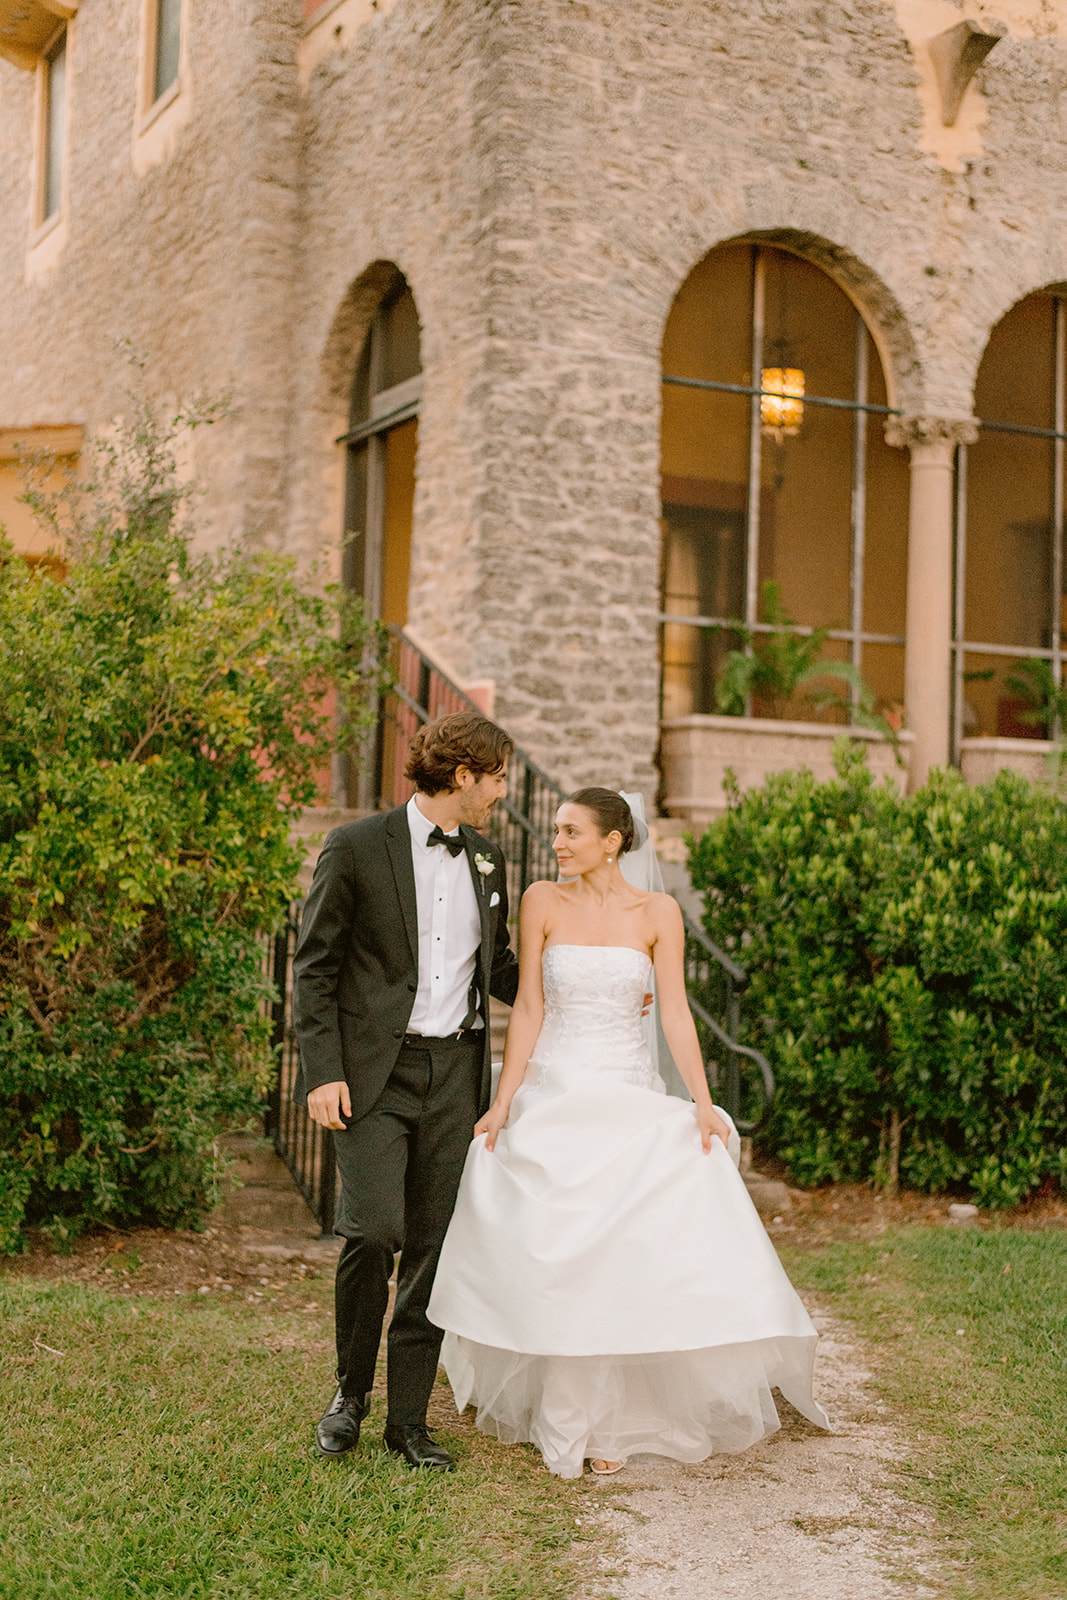 Miami Florida's top wedding photographer captures Bales & Shelby's special day
